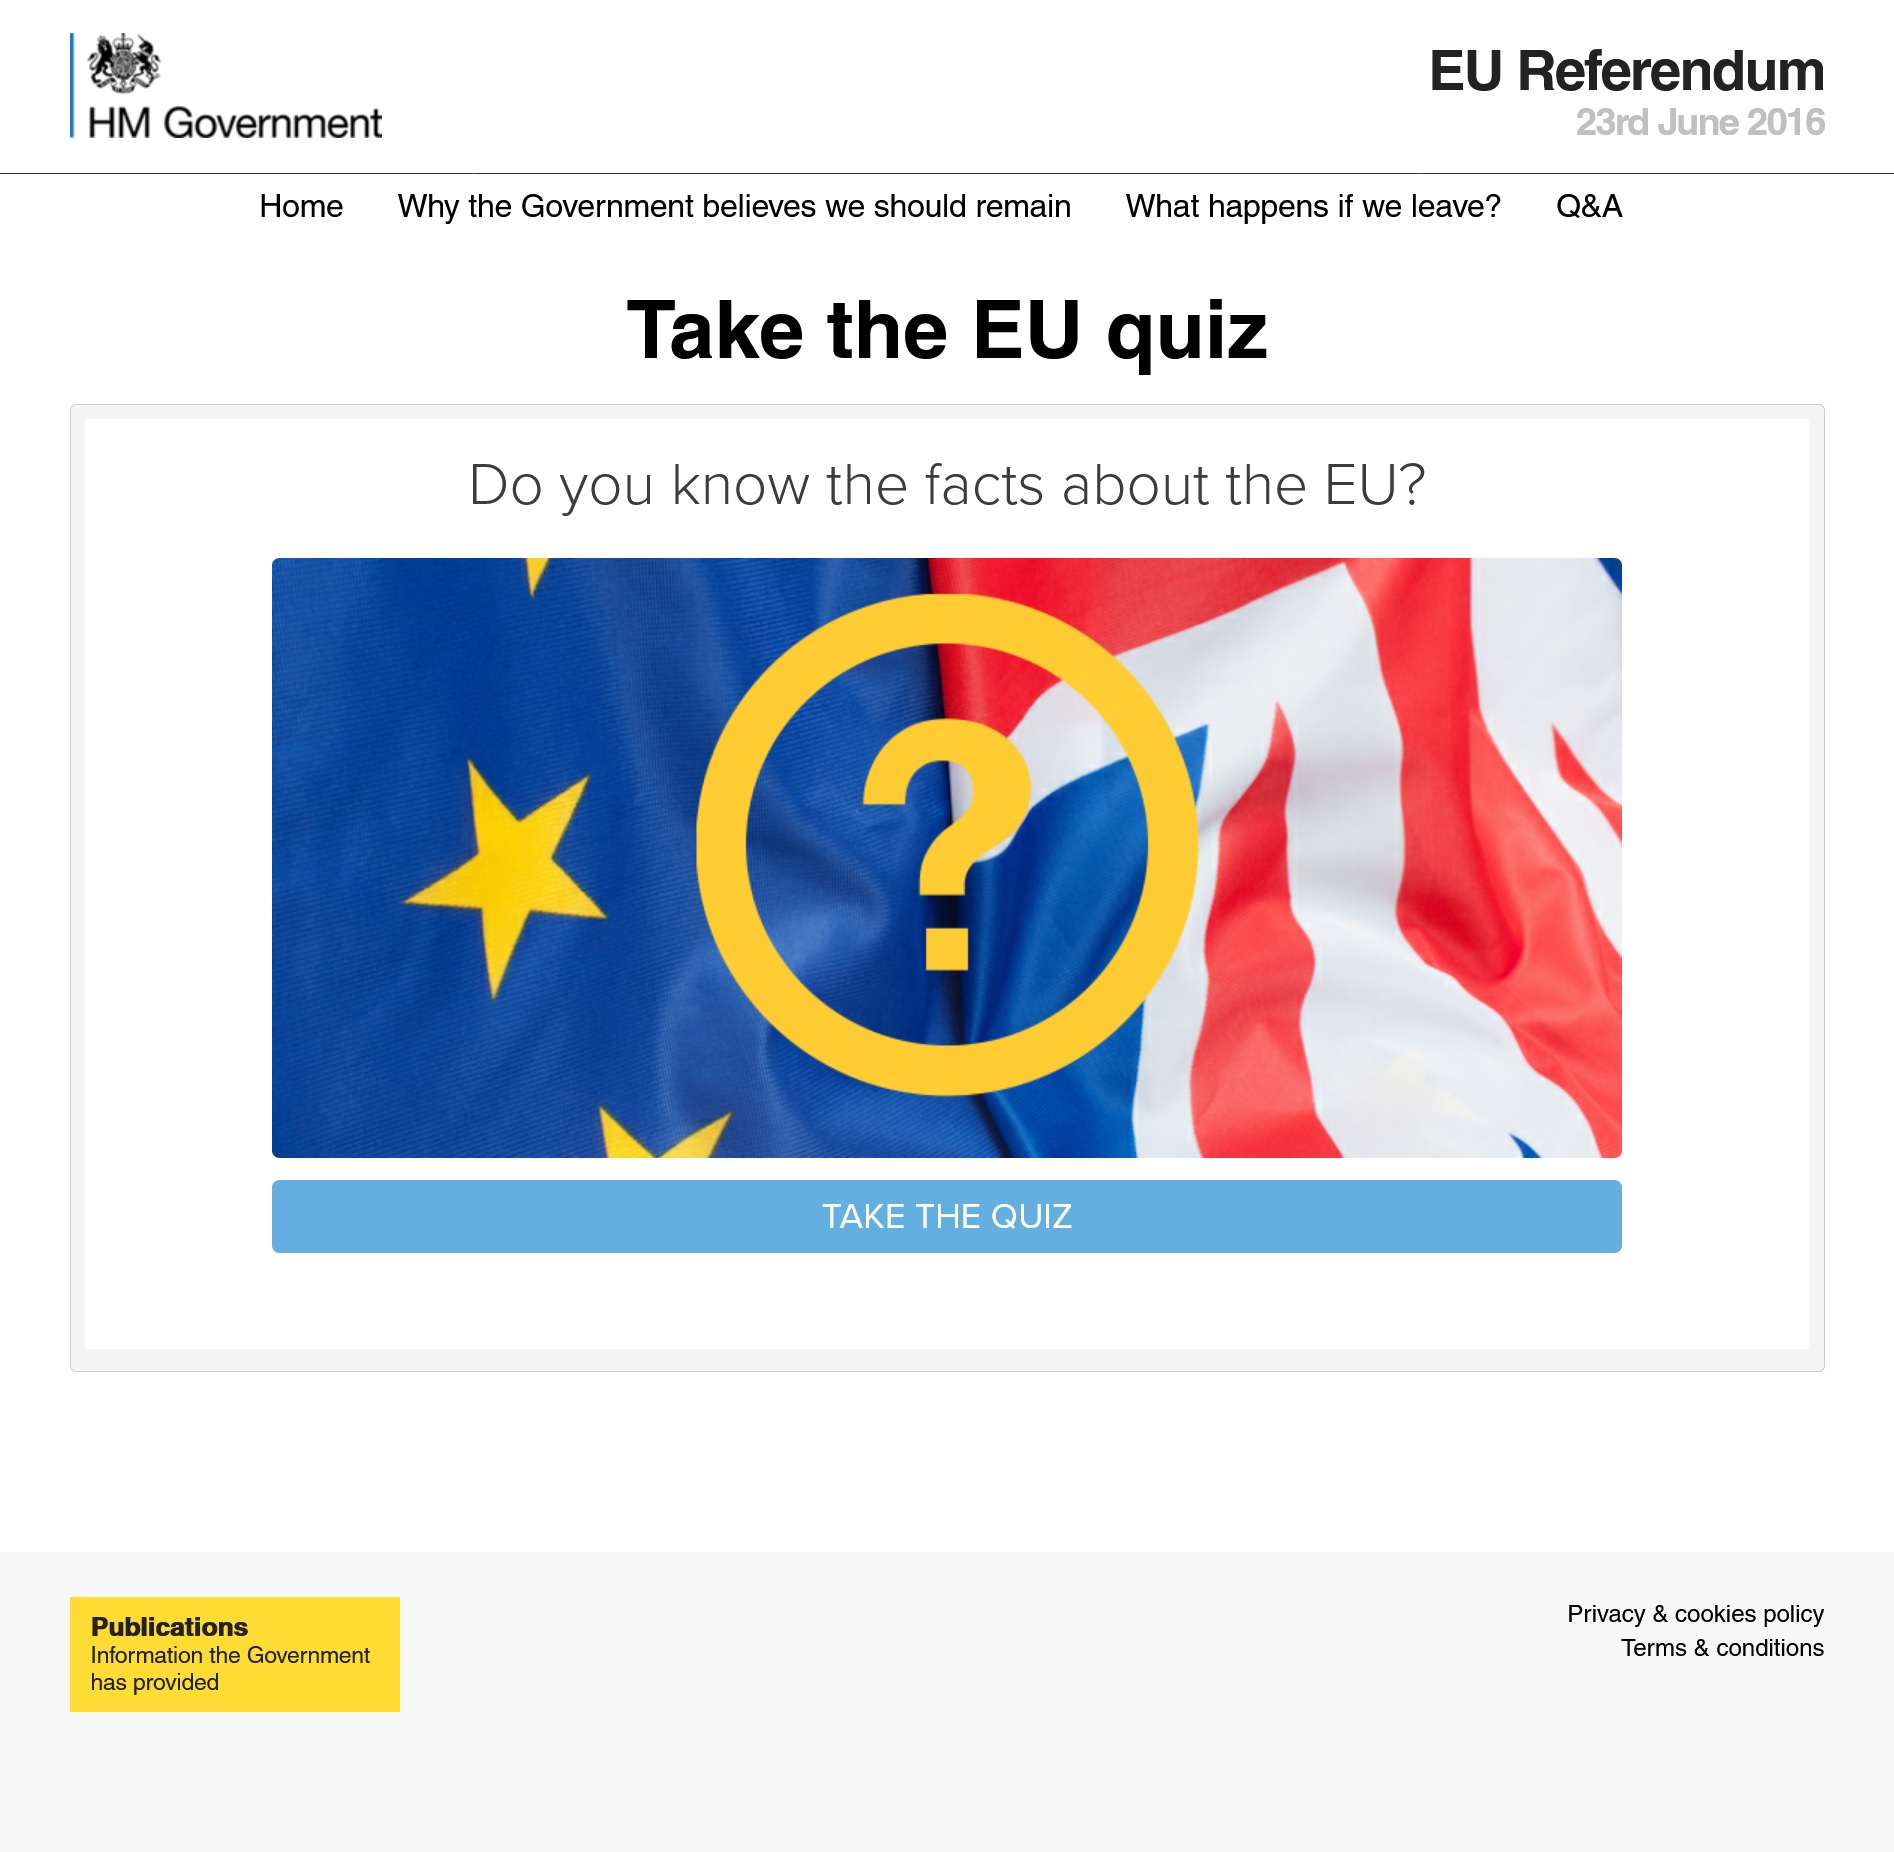 Archived version of Take the EU Quiz - captured 20 June 2016